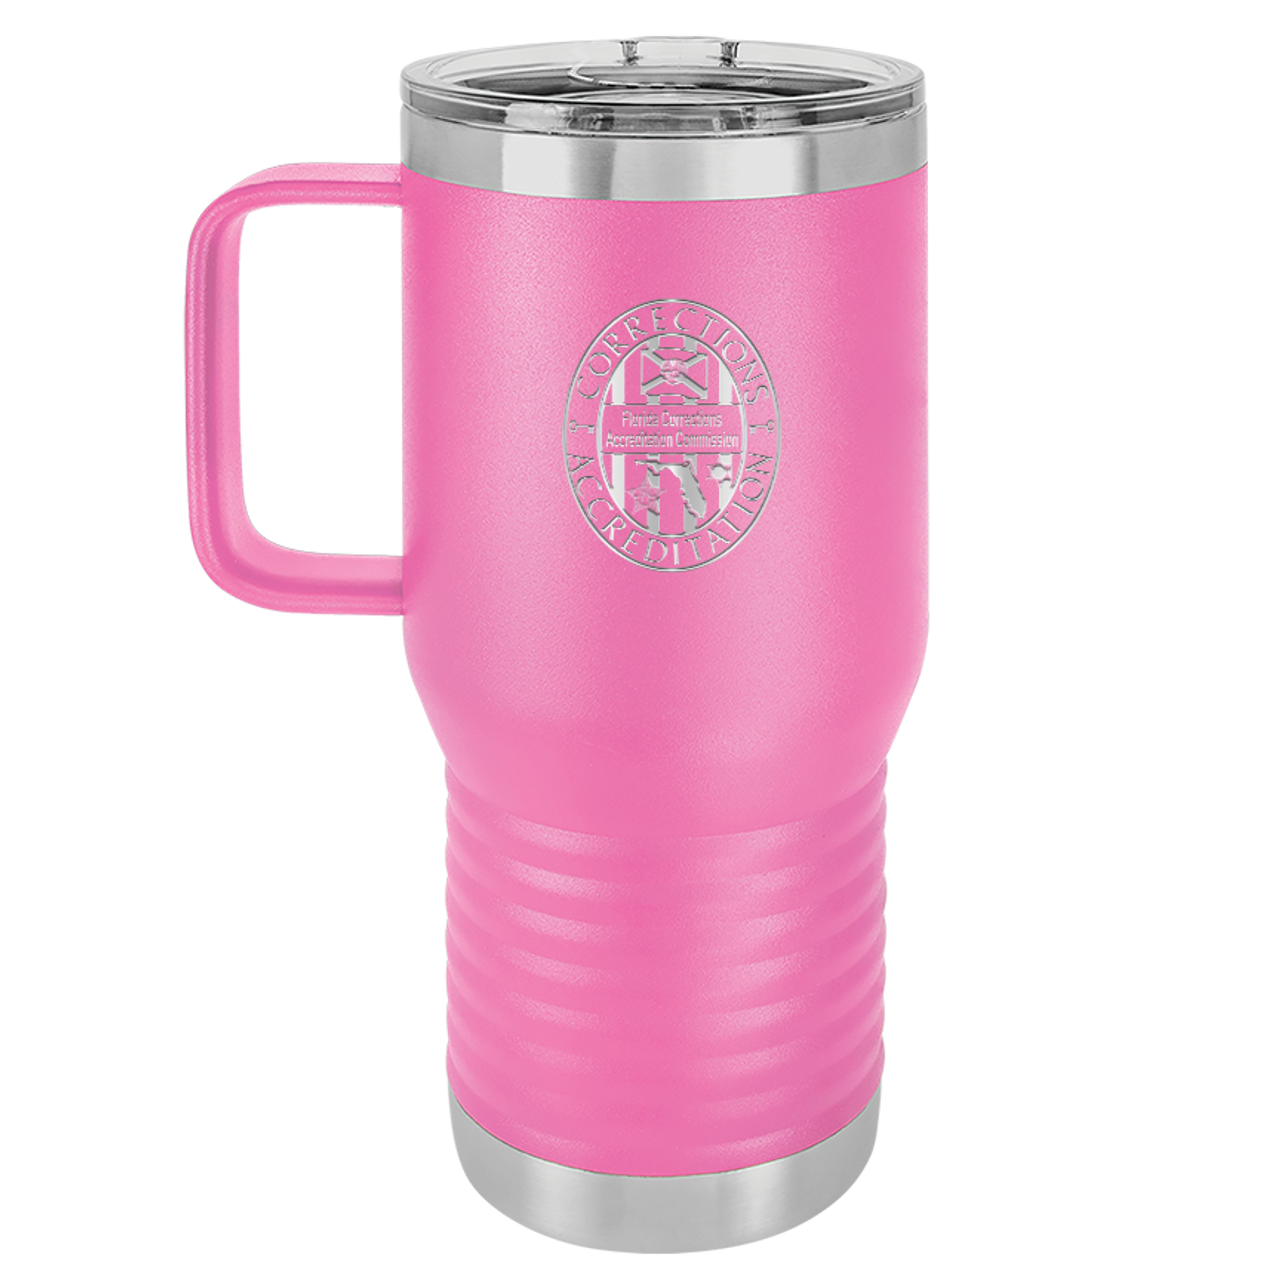 https://cdn11.bigcommerce.com/s-46a8spxhjq/images/stencil/1280x1280/products/25531/78755/LCM20_Handle_20_RIGHT_Drinker_flacr_pink__29652.1653688885.png?c=2?imbypass=on